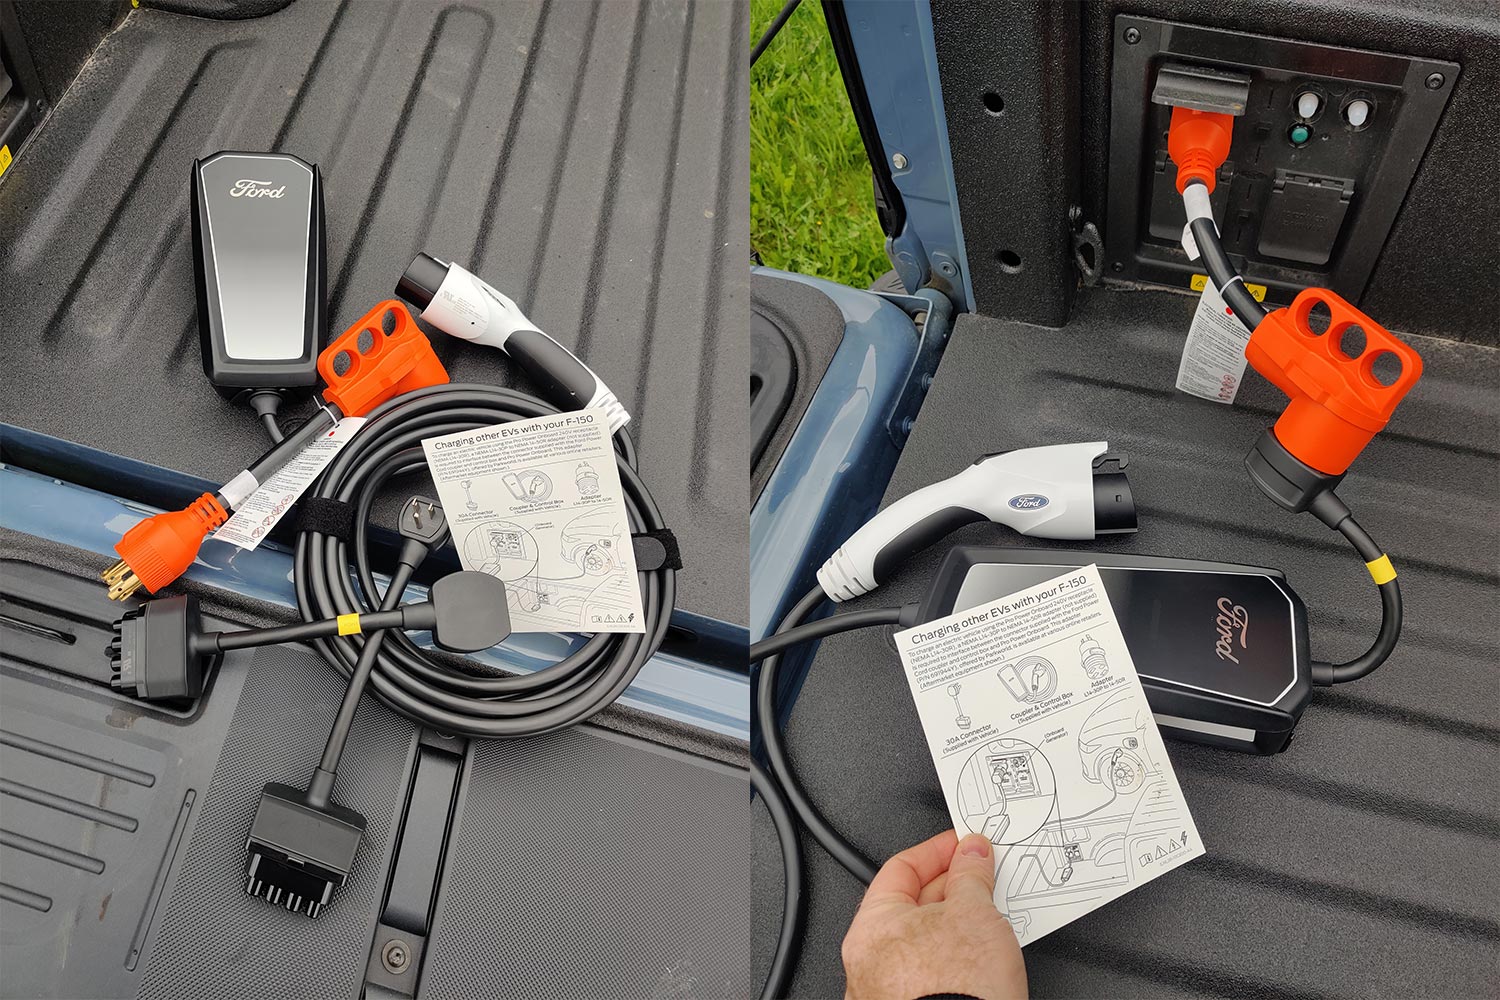 The EV charging gear provided with the Ford F-150 Lightning, with an orange L14-30 to 14-50 adapter